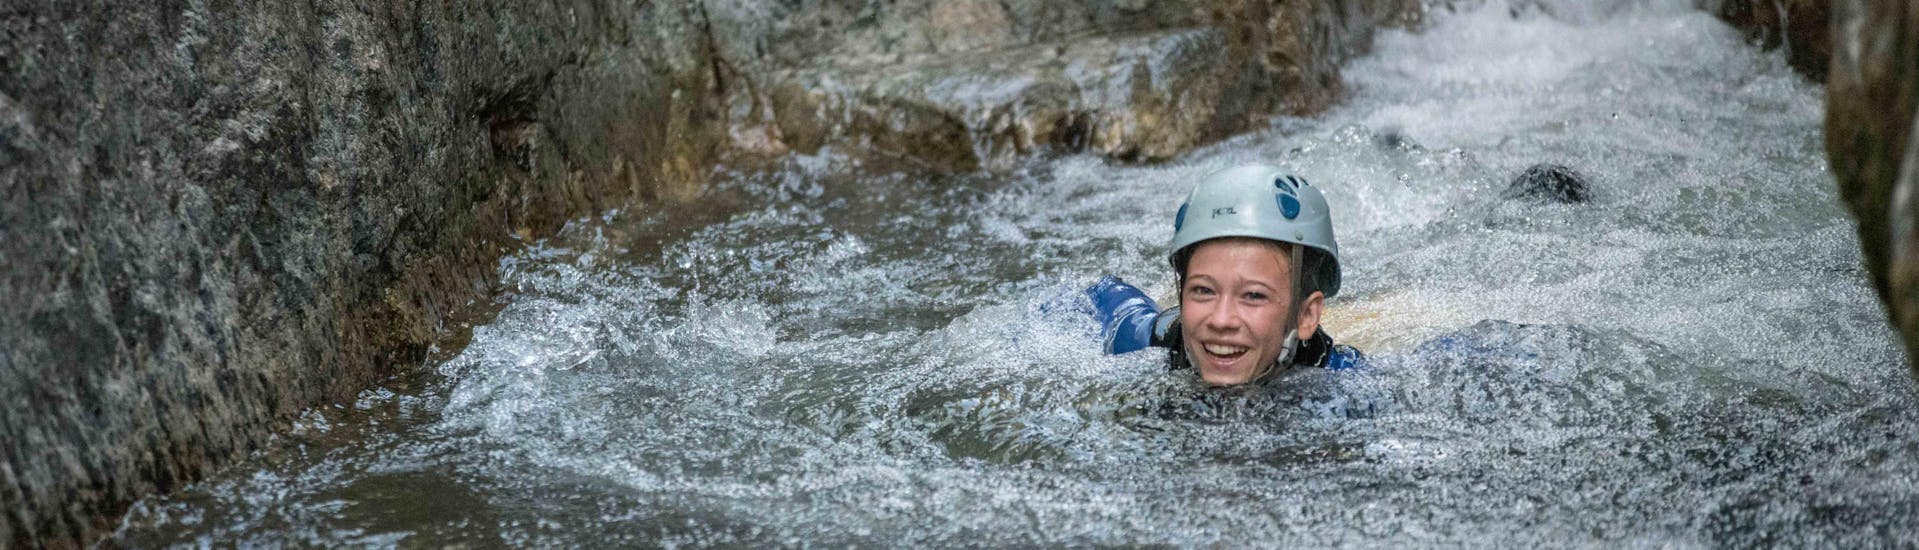 A canyoning enthusiast is swimming in a natural pool during a canyoning tour with Les Intraterrestres.